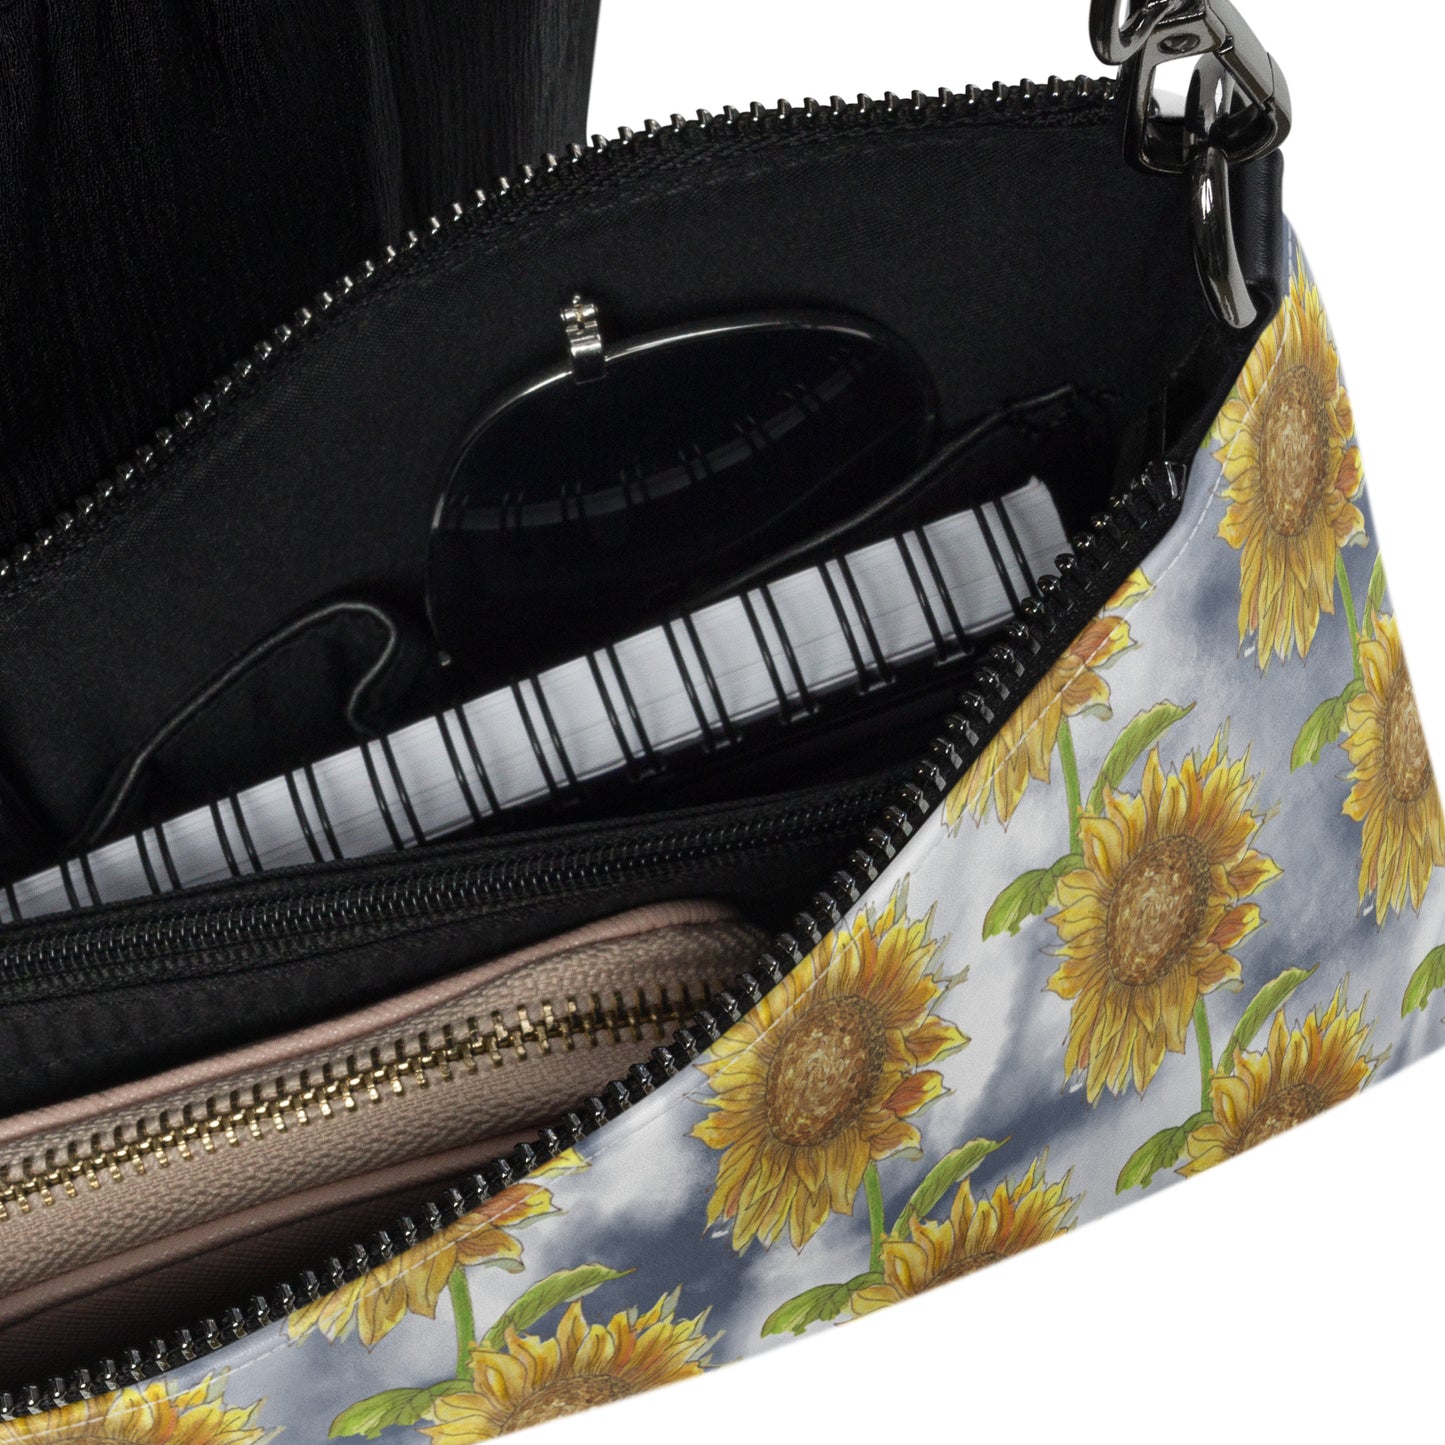 Sunflower crossbody bag. Faux leather with polyester lining and dark grey hardware. Comes with adjustable removable wrist and shoulder straps. Features patterned design of watercolor sunflowers against a cloudy background. Detail view of zipper enclosure and inside pockets. Shown with wallet, notebook, and sunglasses inside.